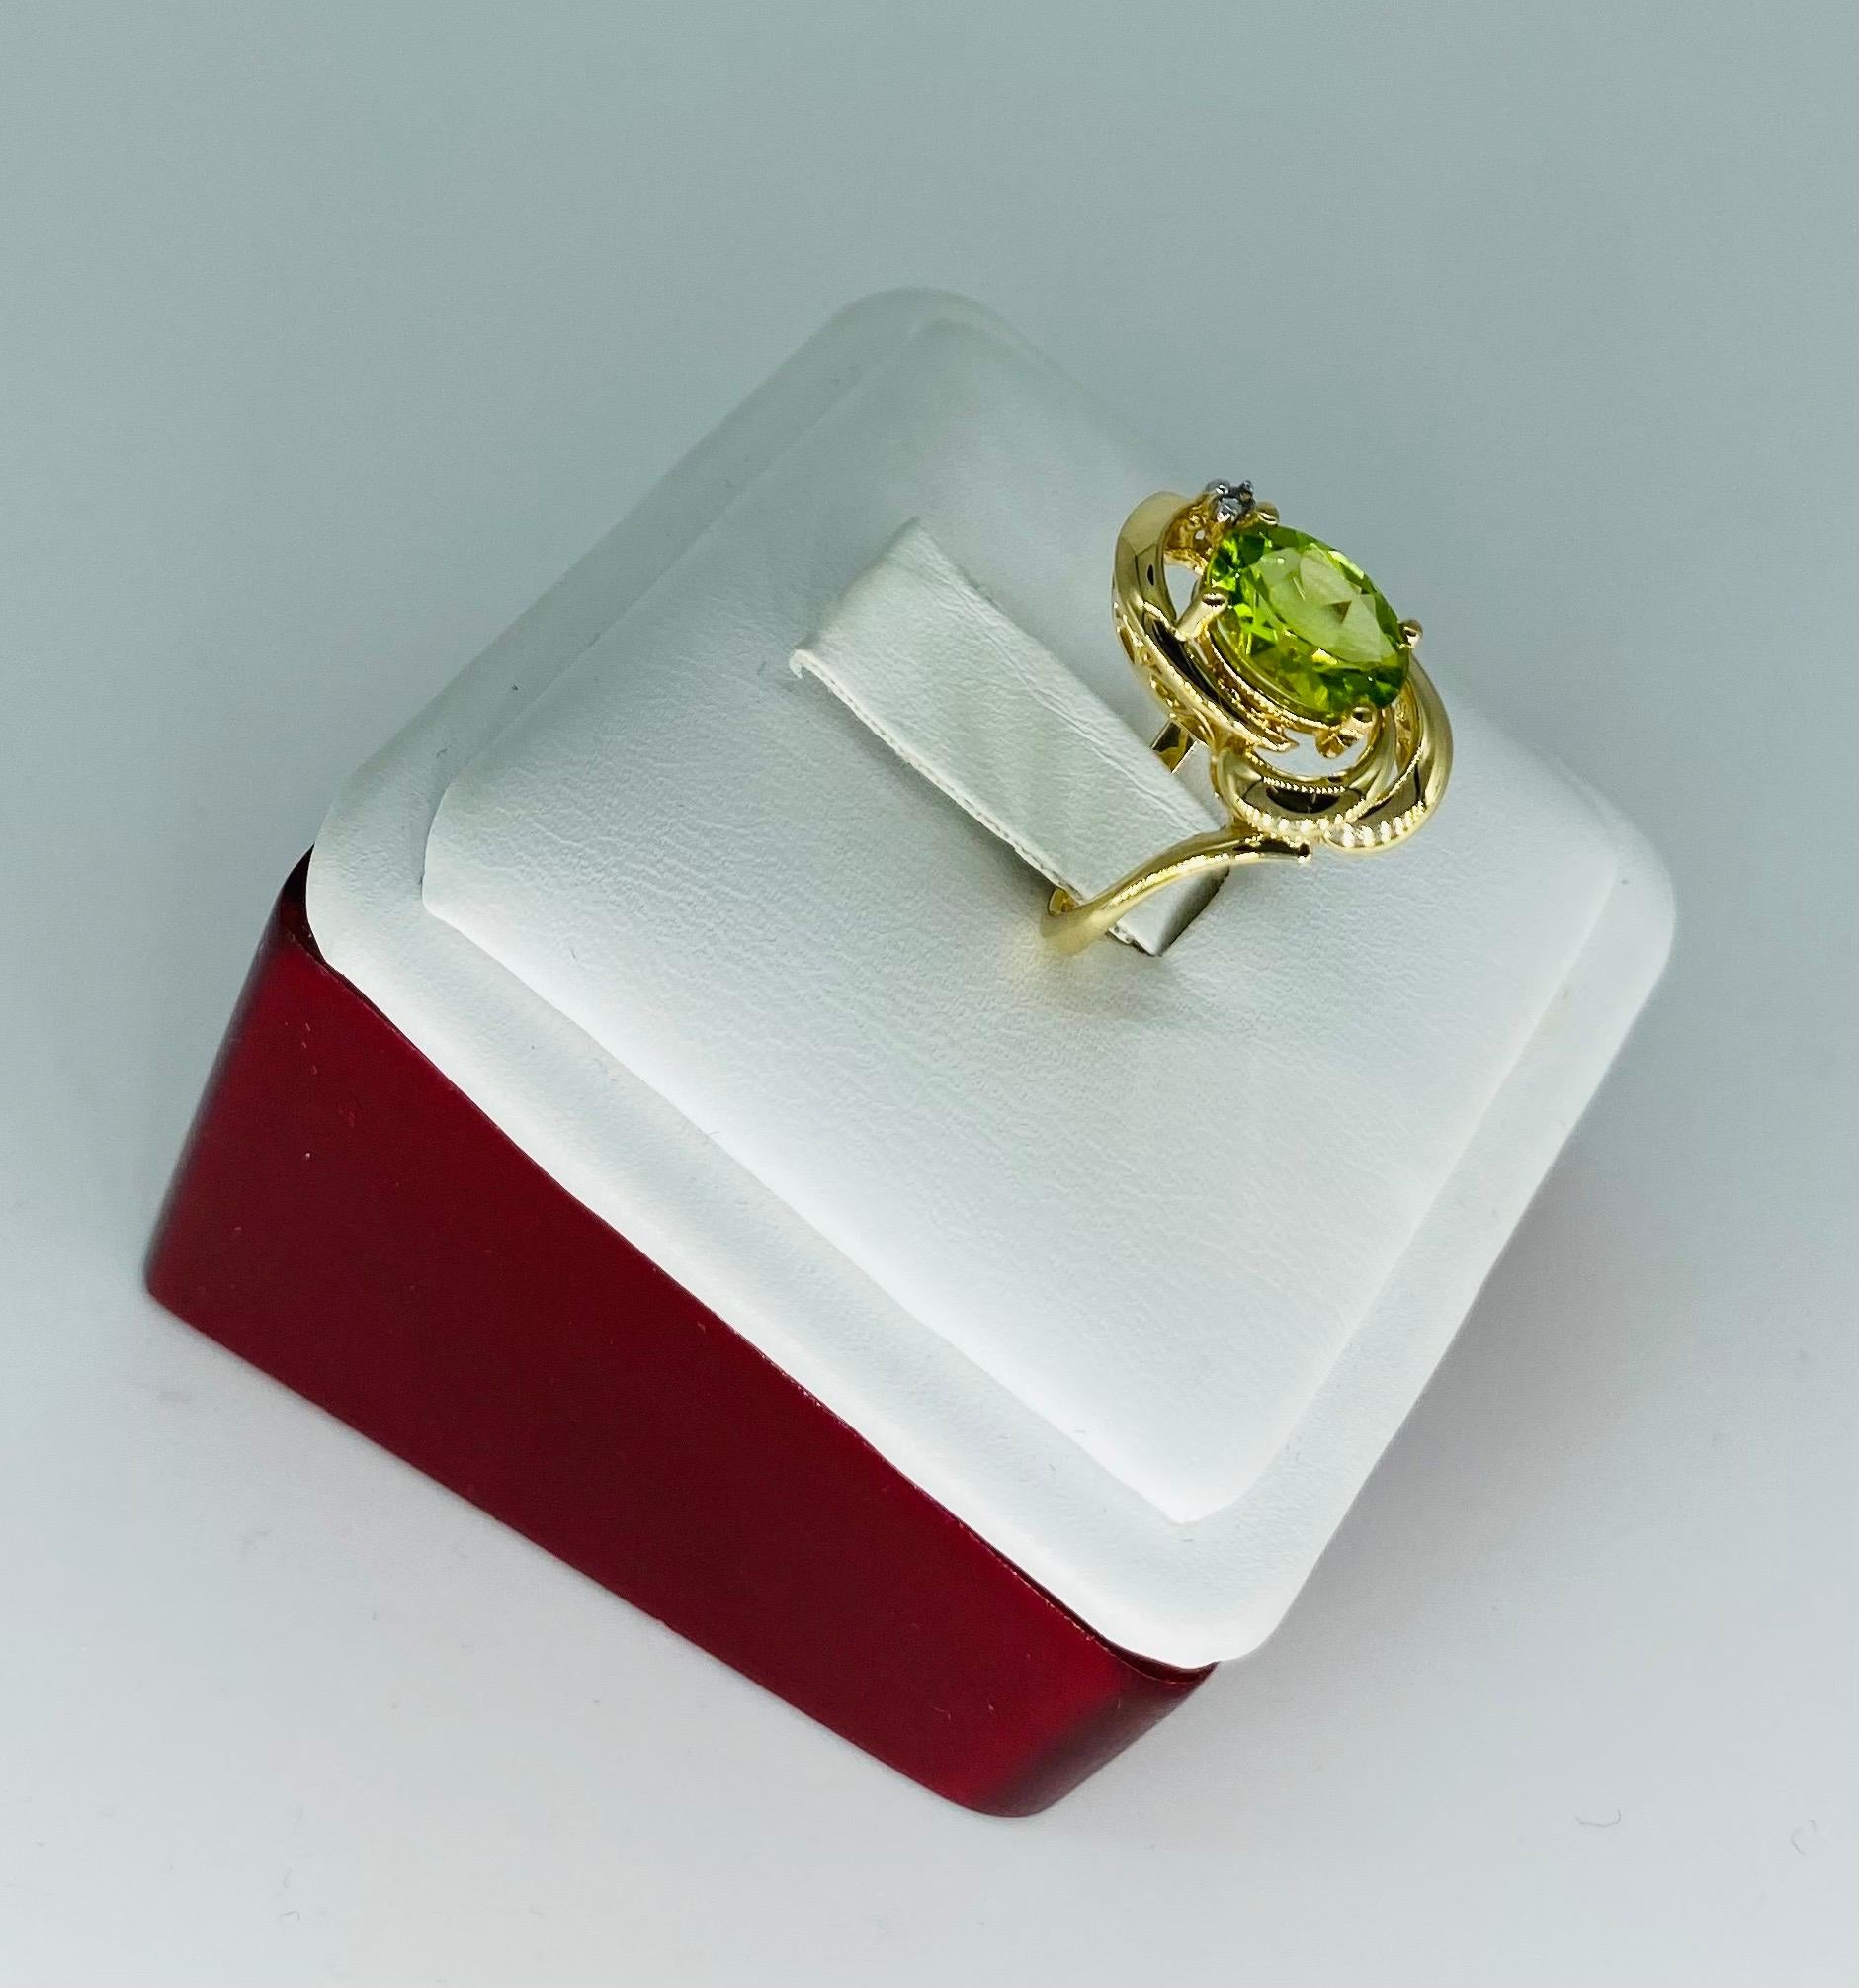 Vintage 2.02 Carat Peridot & Diamond Leaf Fashion Ring 14k Gold. Creative design with a center peridot weighing approx 2 carats and a single diamond on top connecting as a leaf design. Very nice design ring made in 14k solid gold. The ring is a size